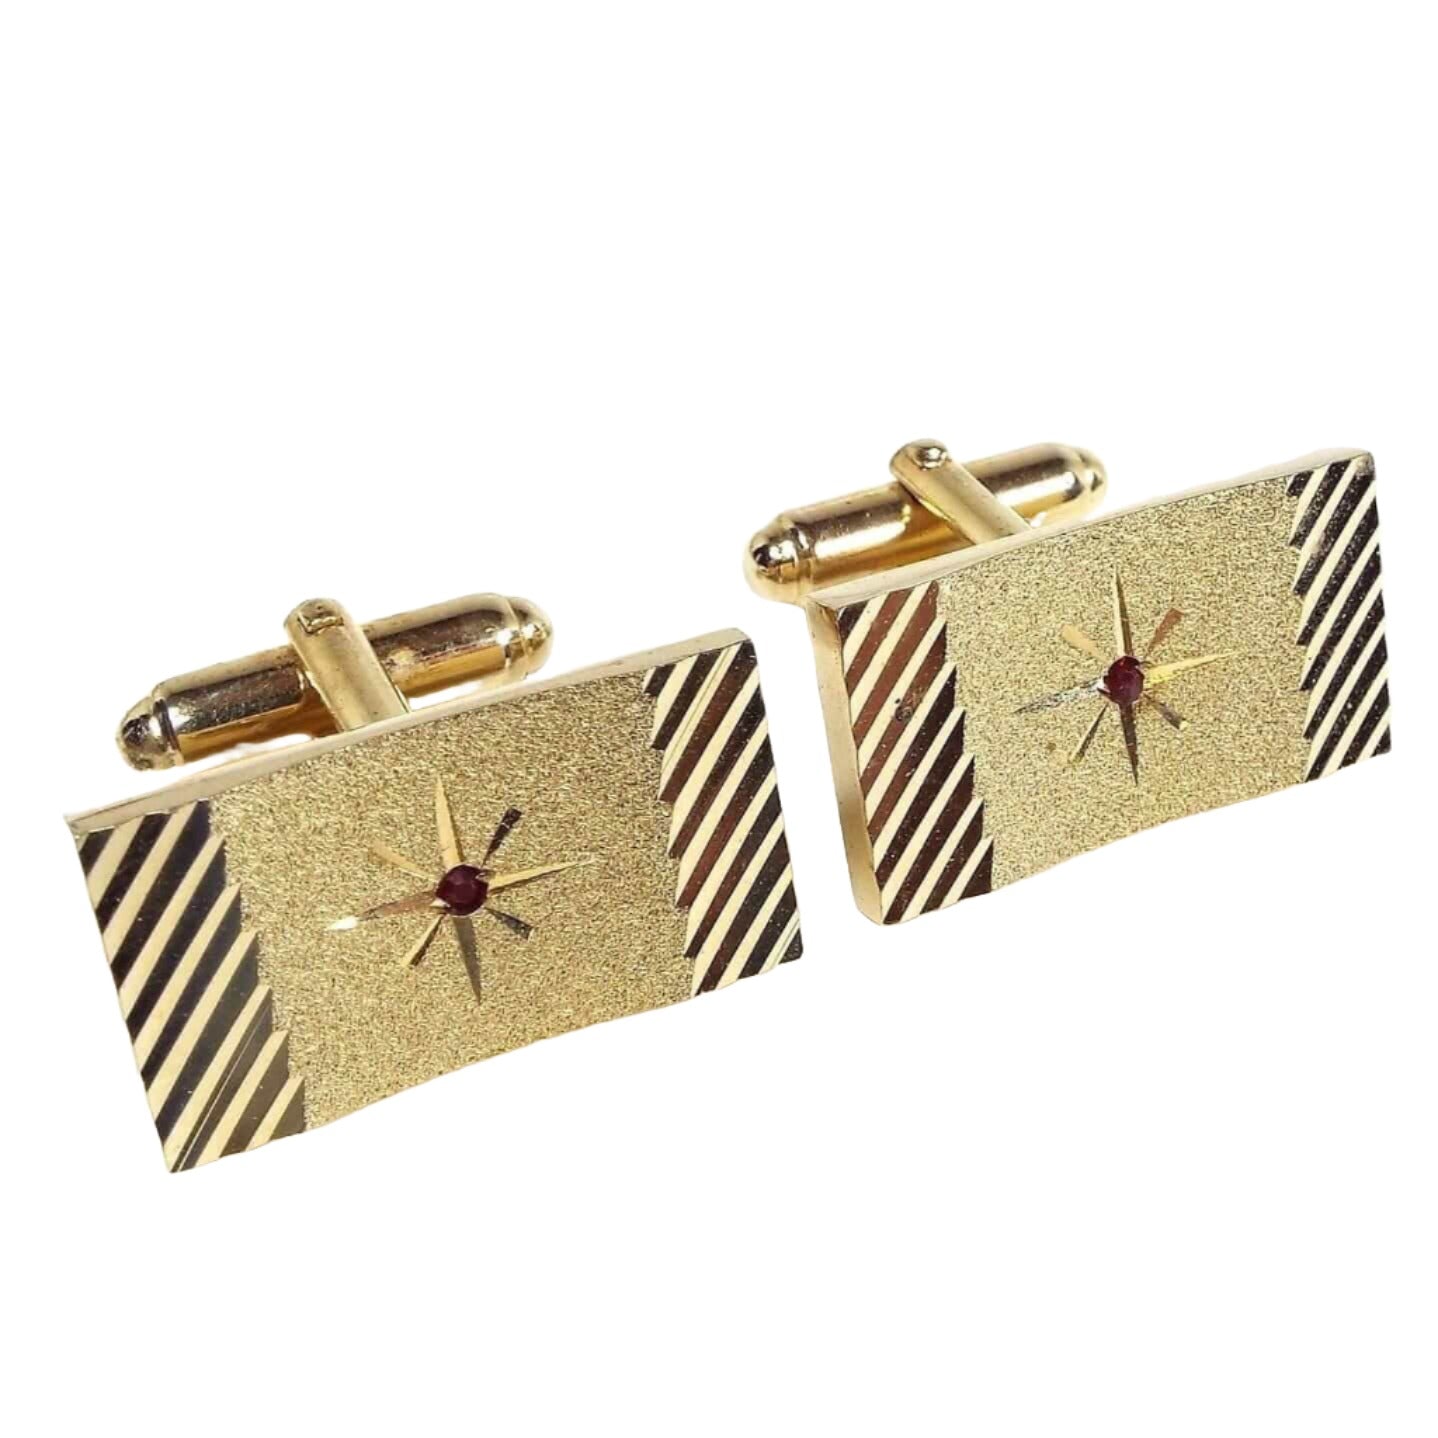 Angled front view of the Mid Century vintage Anson cufflinks. They are gold tone in color and rectangle in shape. The fronts have a cut etched starburst design with a single red rhinestone in the very middle. The sides have a diagonal cut etched line design. 